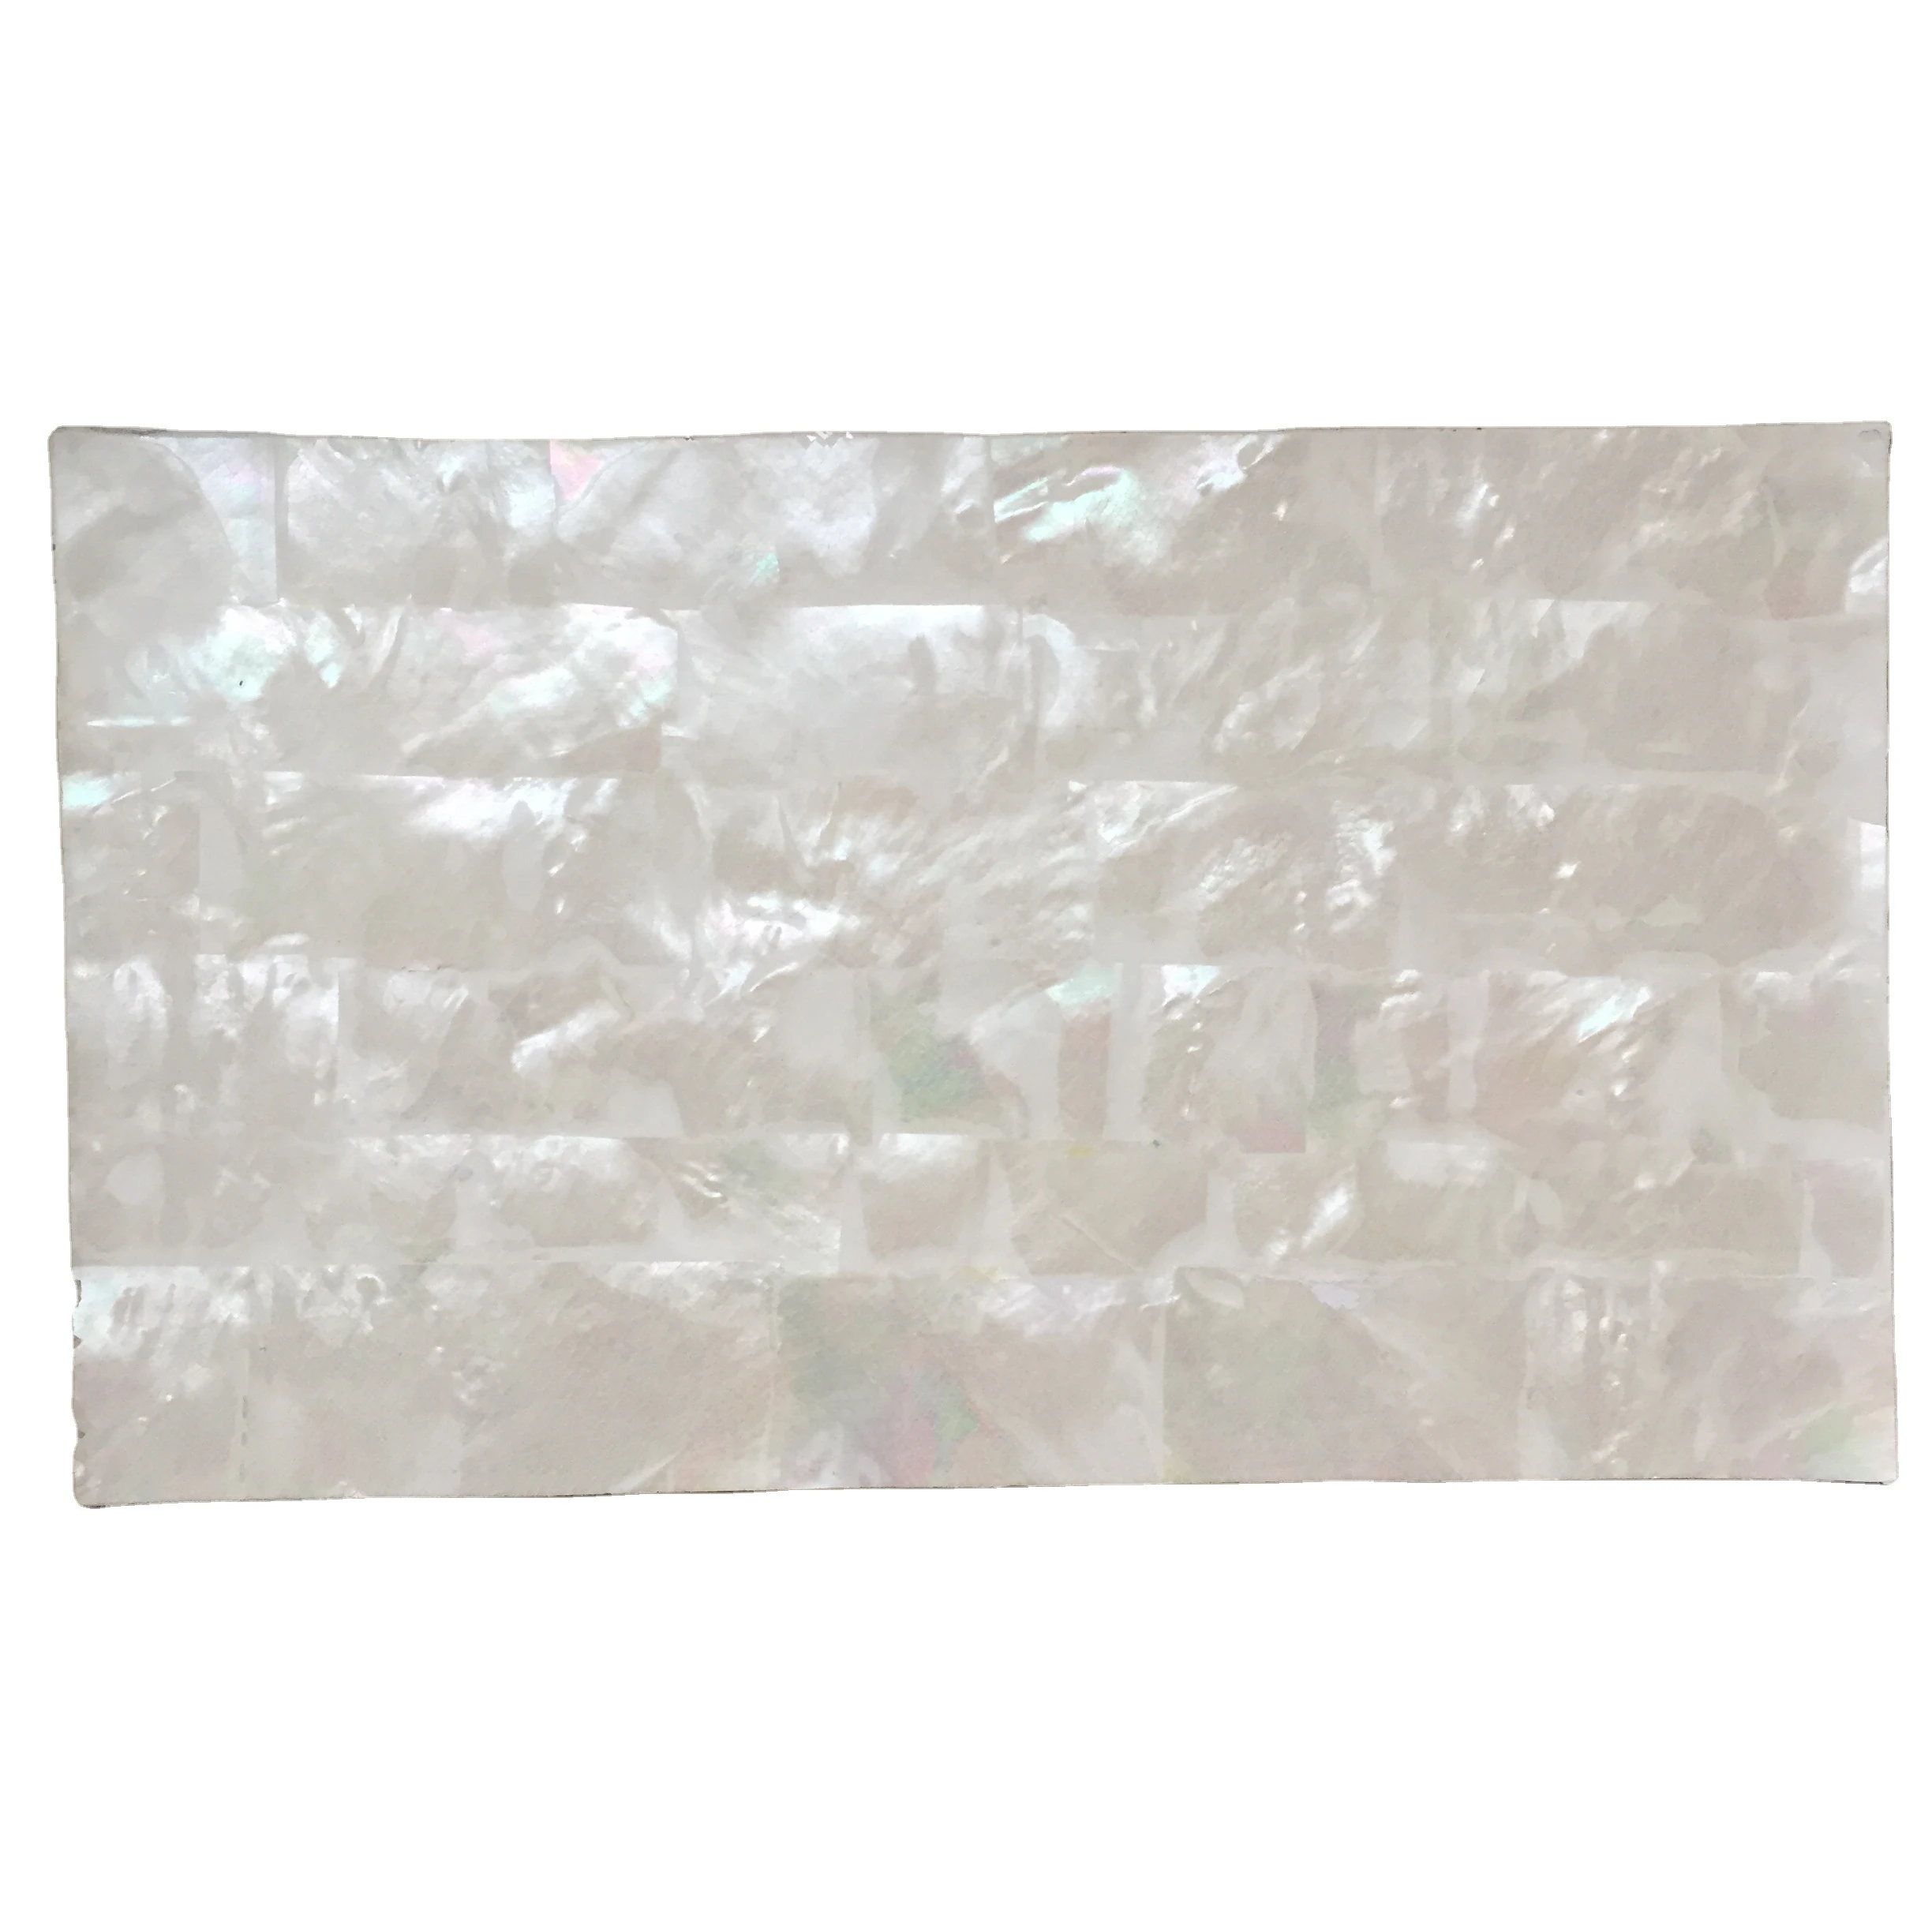 White Mother of Pearl shell sheet soft shell veneer with adhesive backing 140x240x0.2mm